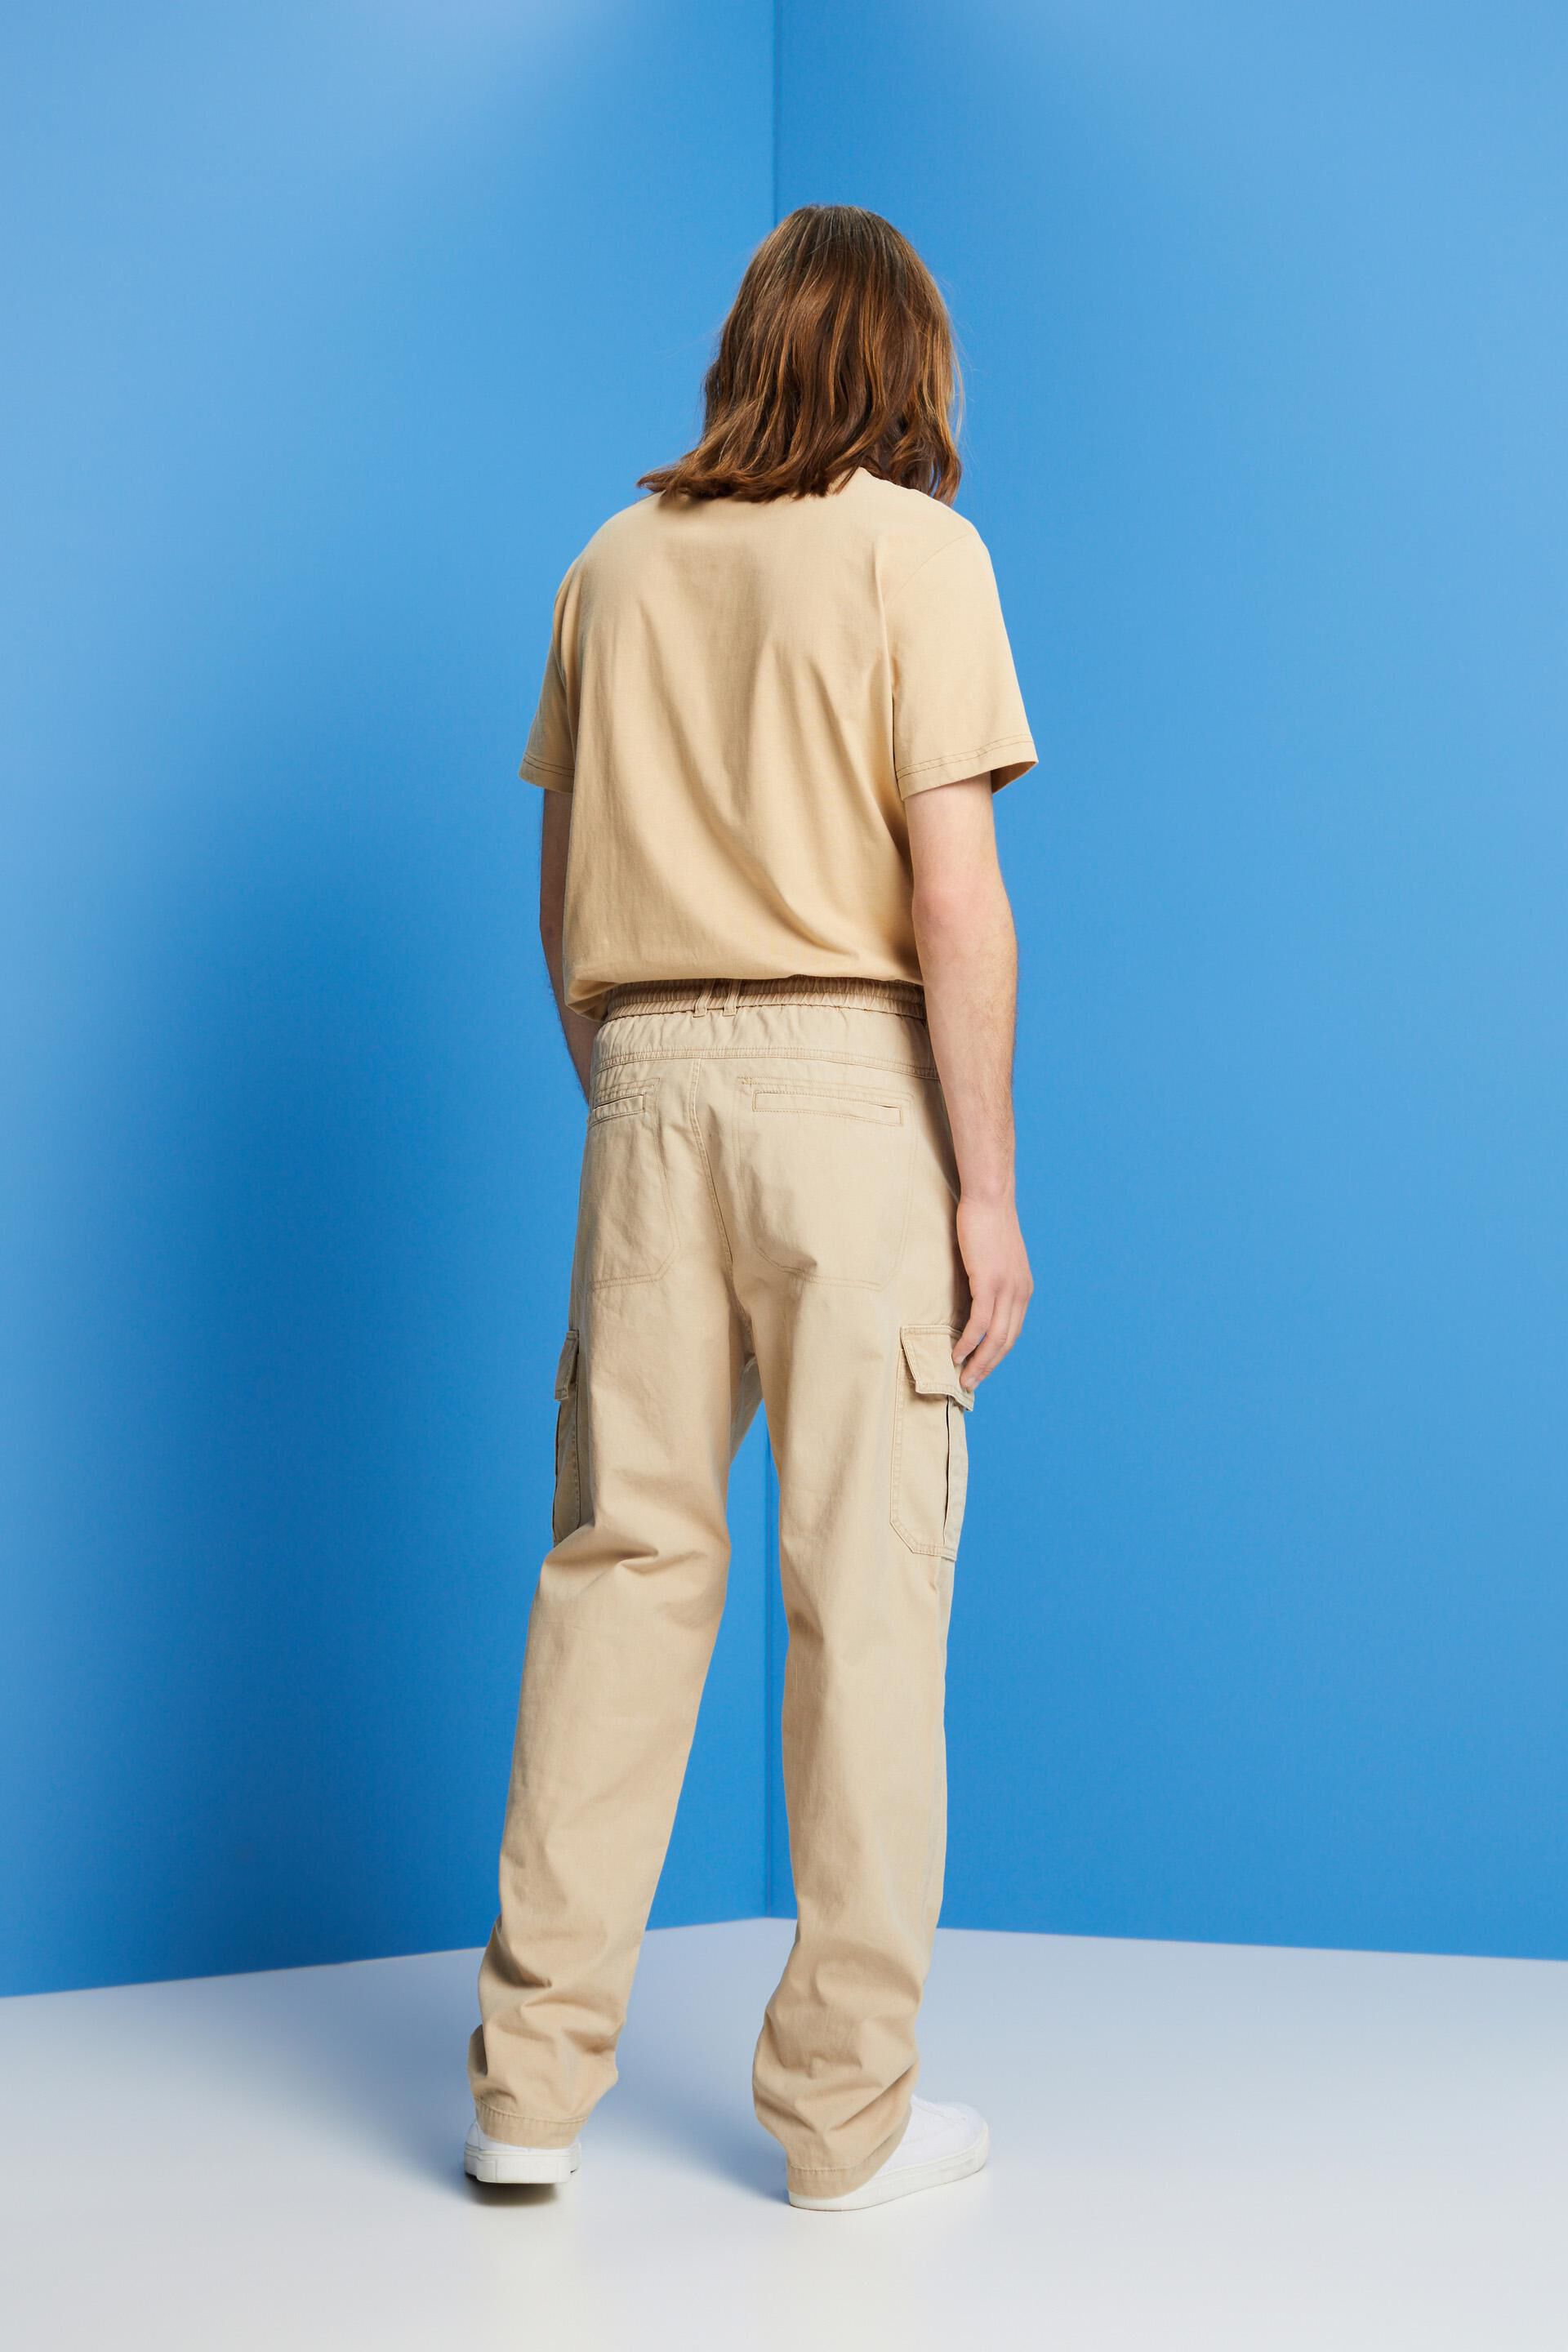 Clothing & Shoes - Bottoms - Pants - Esprit Cargo Straight Pant With  Drawstring Hem - Online Shopping for Canadians